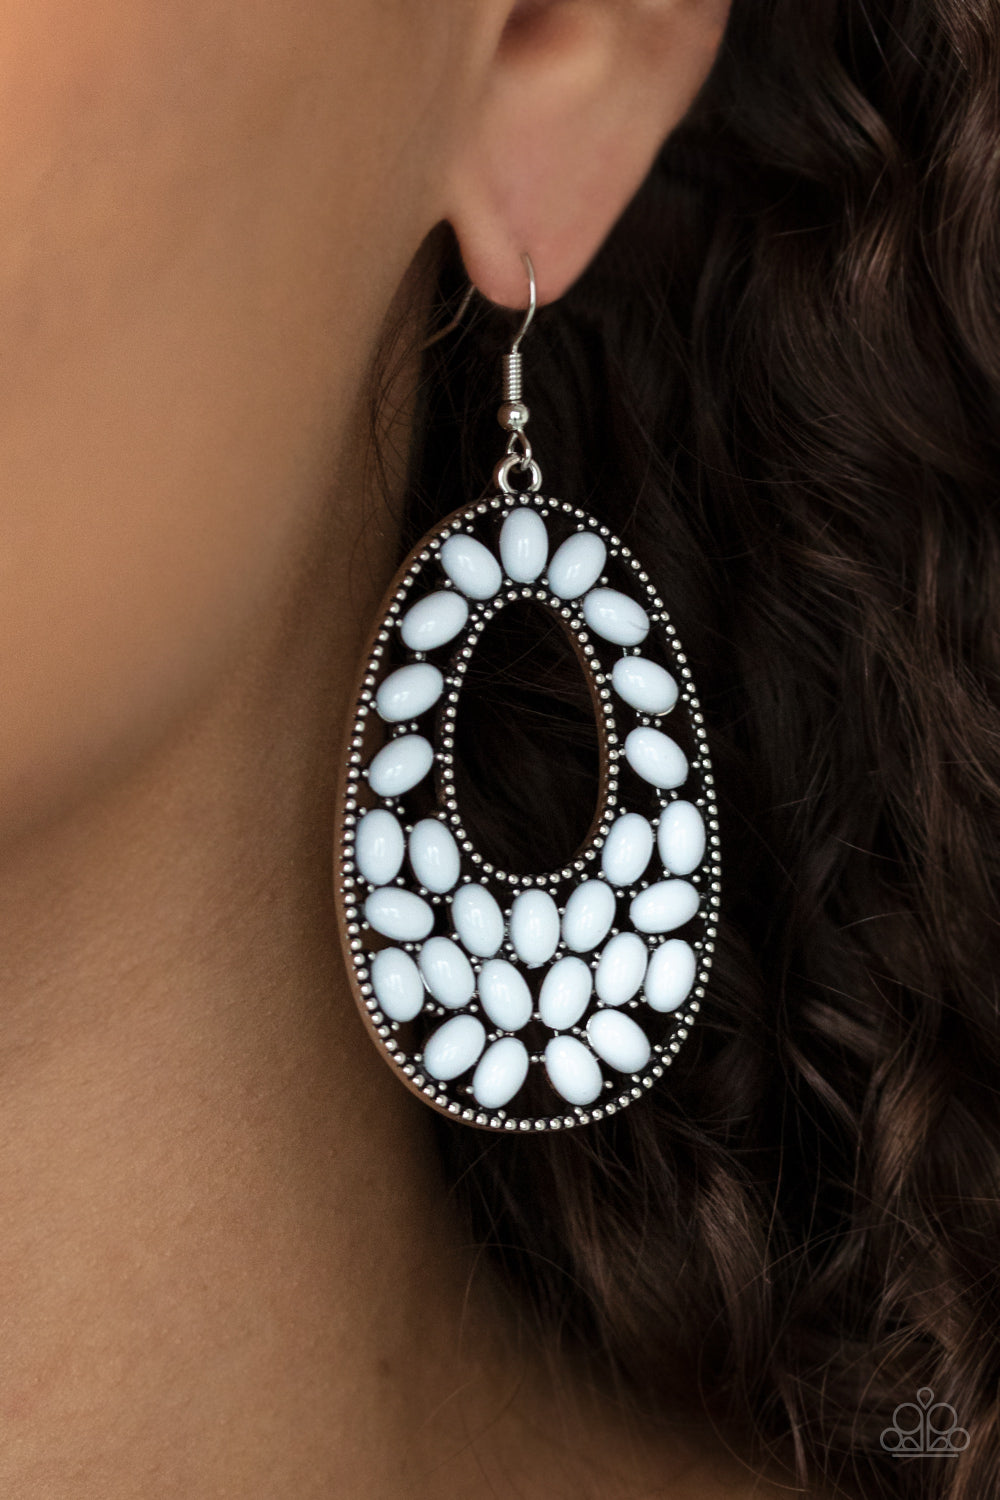 Beaded Shores White Earring - Paparazzi Accessories.  A collection of oval white beads collect inside a studded silver oval frame, creating a bright pop of color. Earring attaches to a standard fishhook fitting.  ﻿﻿﻿All Paparazzi Accessories are lead free and nickel free!  Sold as one pair of earrings.